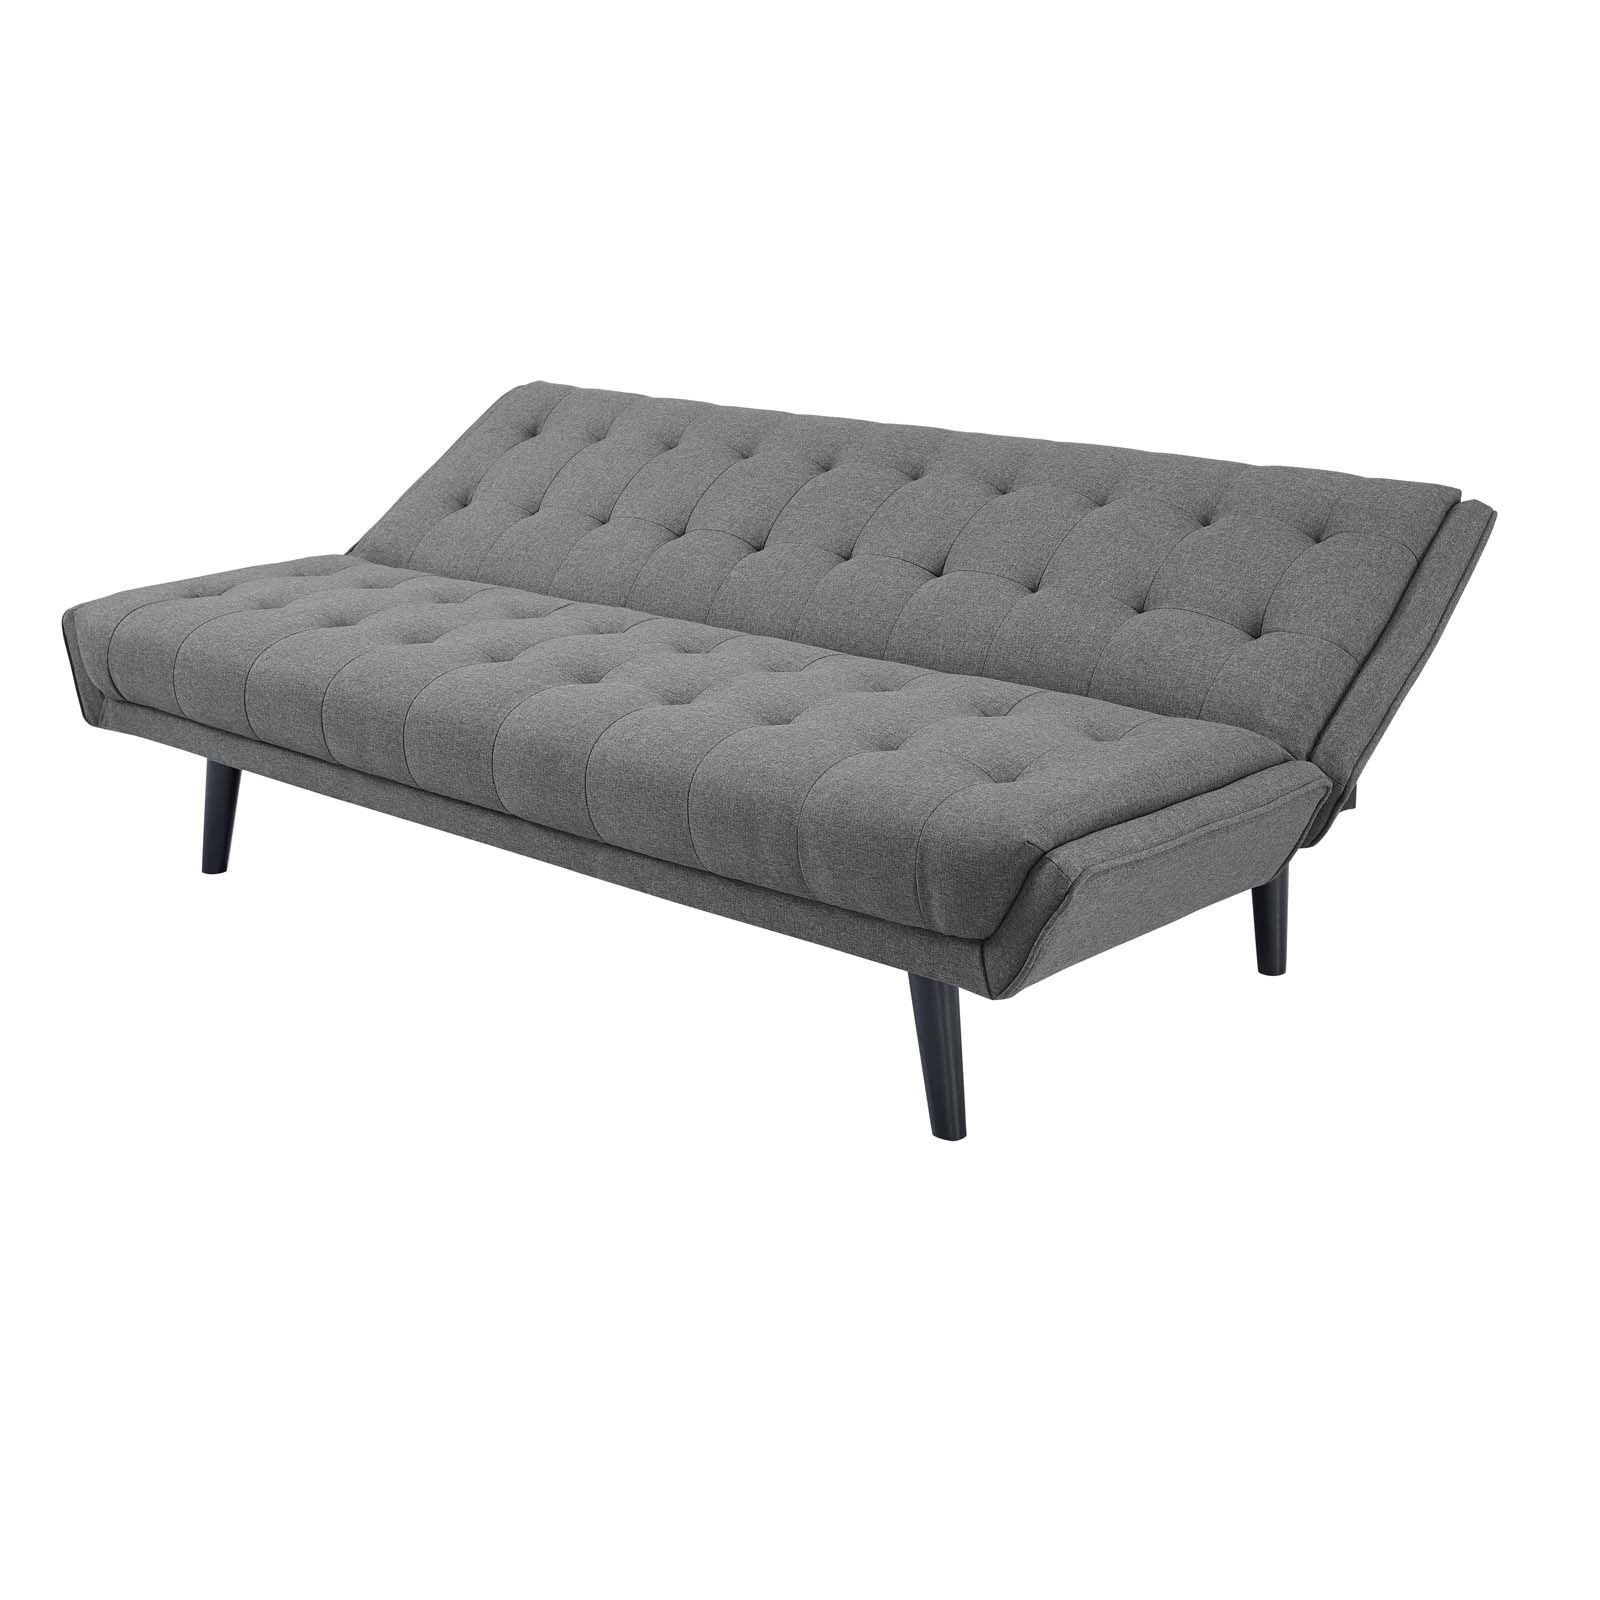 Tufted Convertible Sleeper Sofas In Recent Glance Tufted Convertible Fabric Sofa Bed Gray (View 7 of 15)